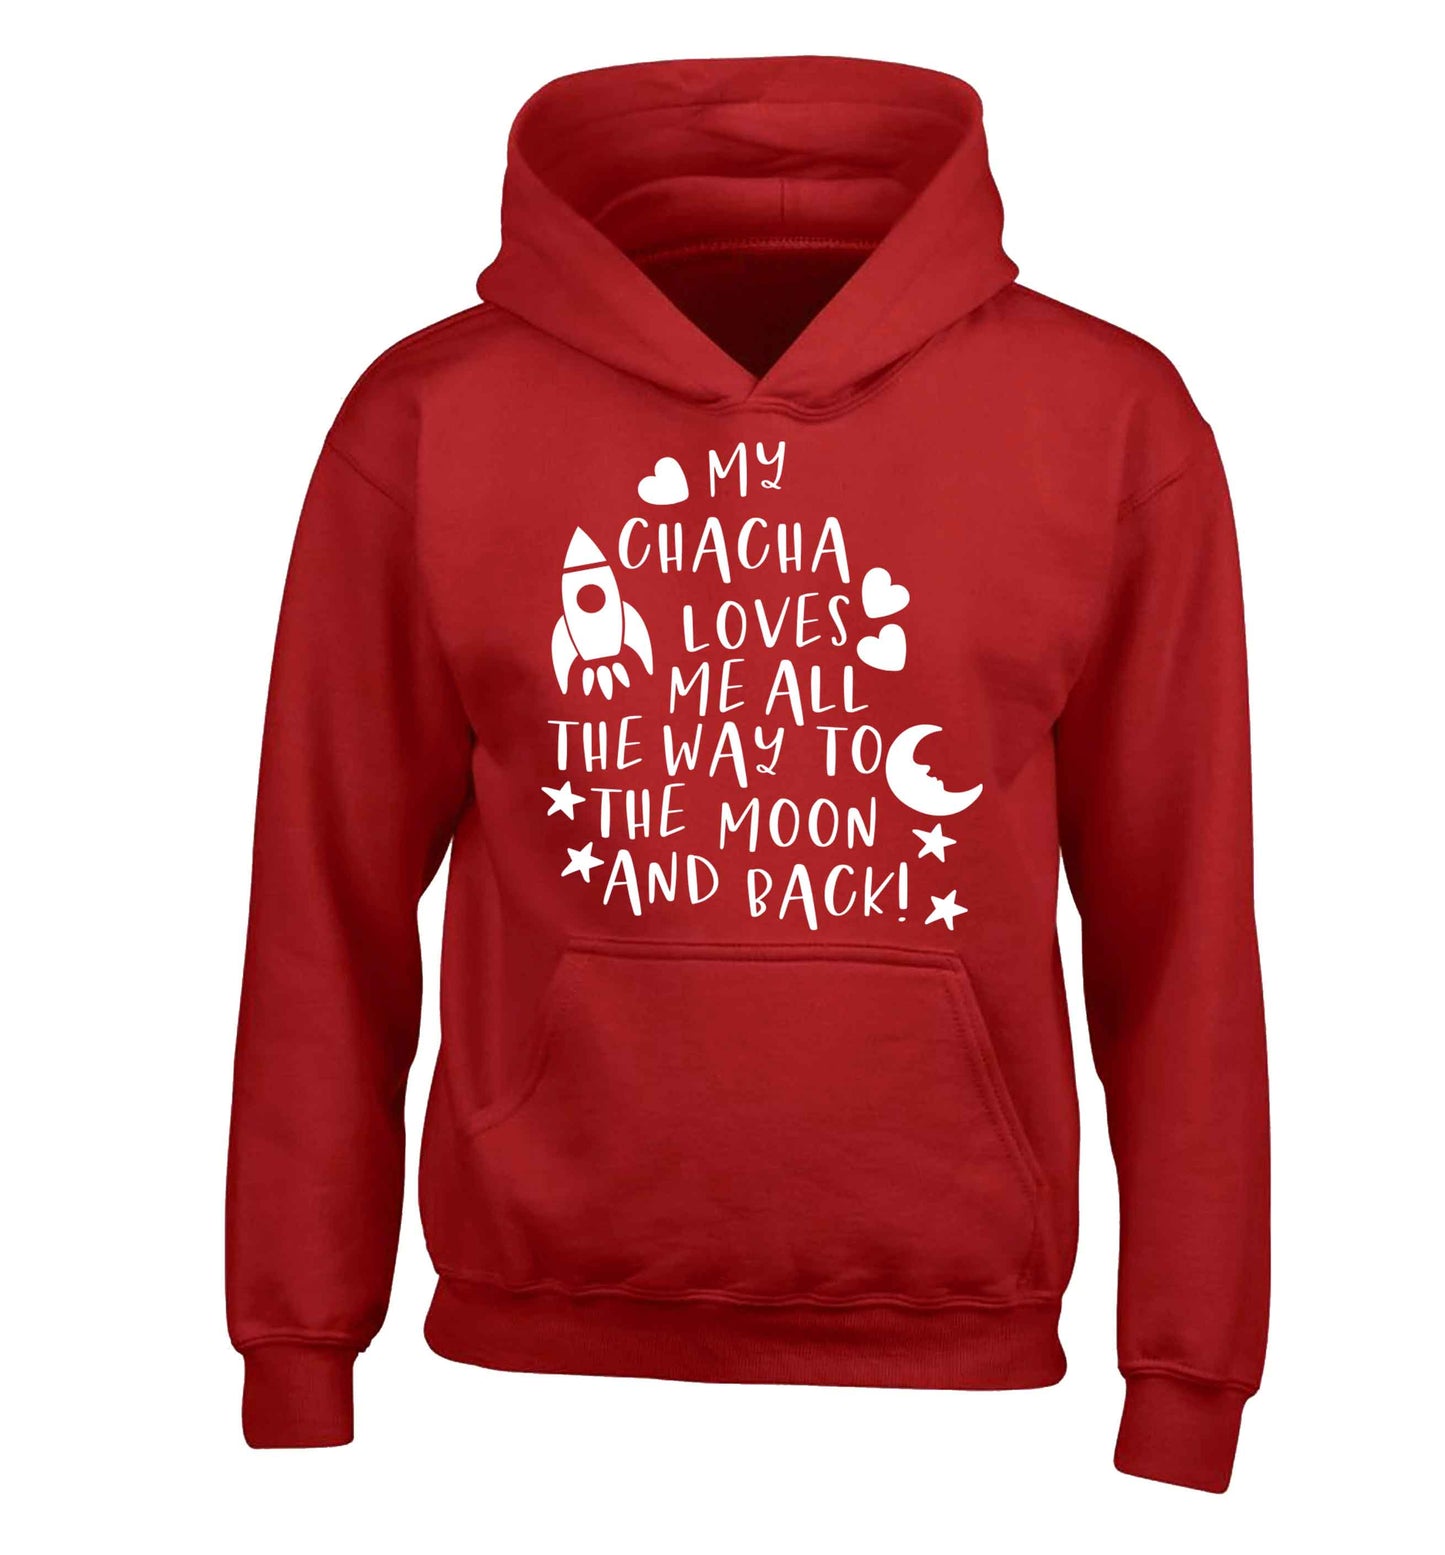 My chacha loves me all the way to the moon and back children's red hoodie 12-13 Years